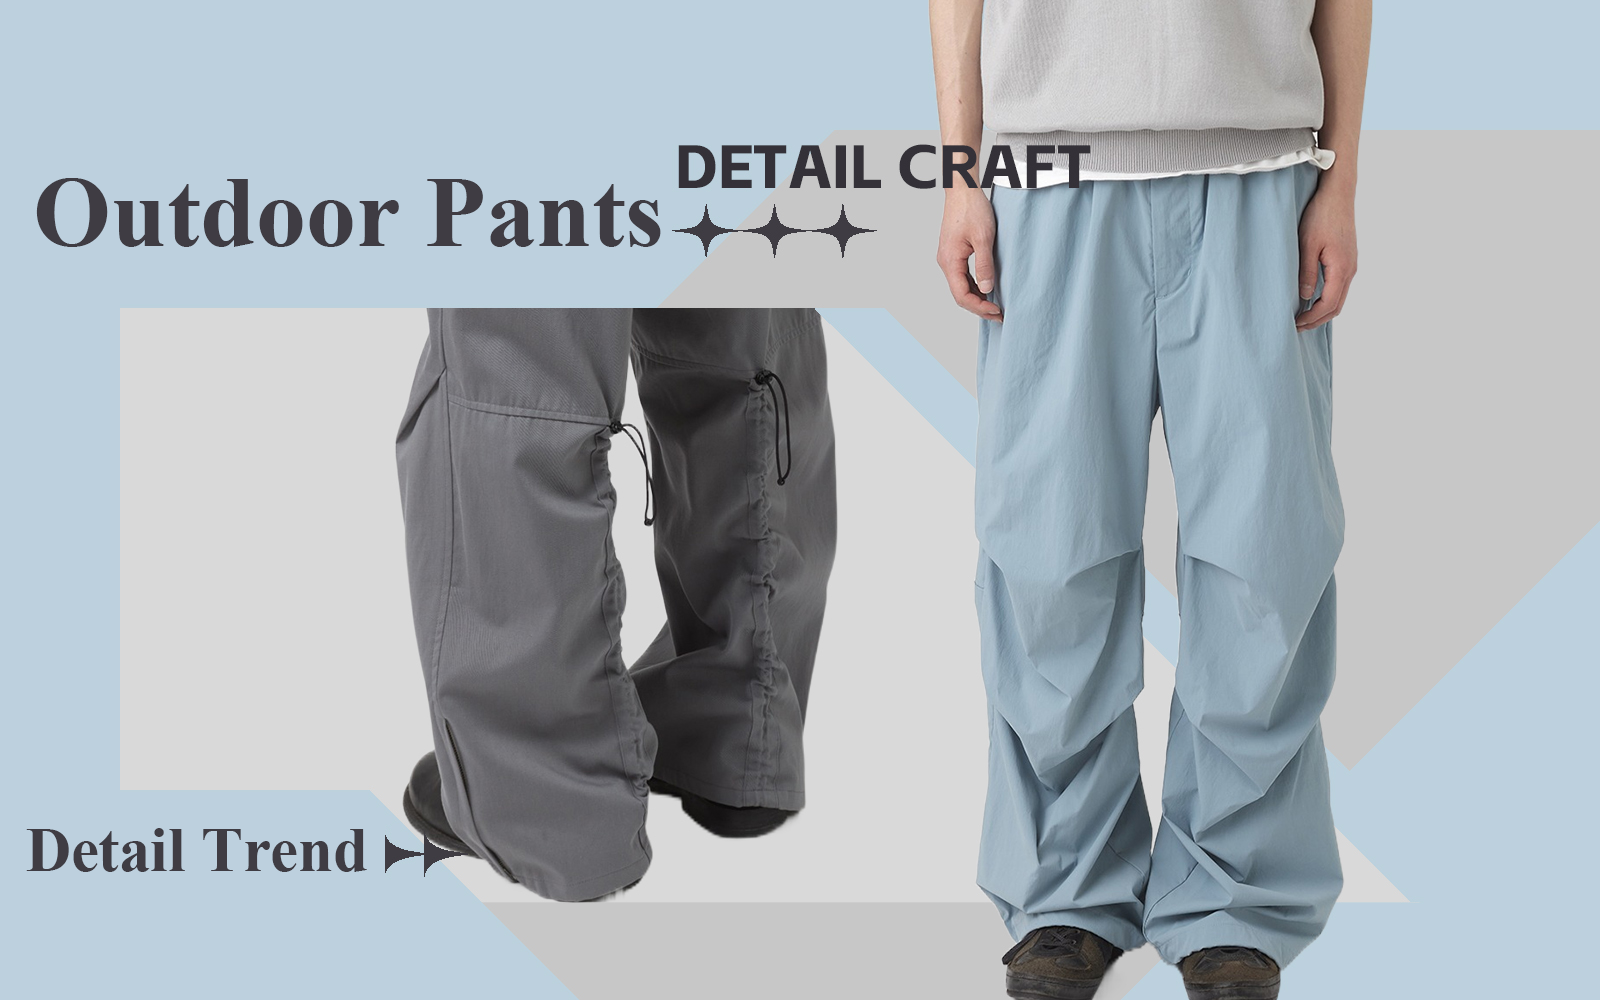 Leisure and Practical -- The Detail & Craft Trend for Outdoor Pants